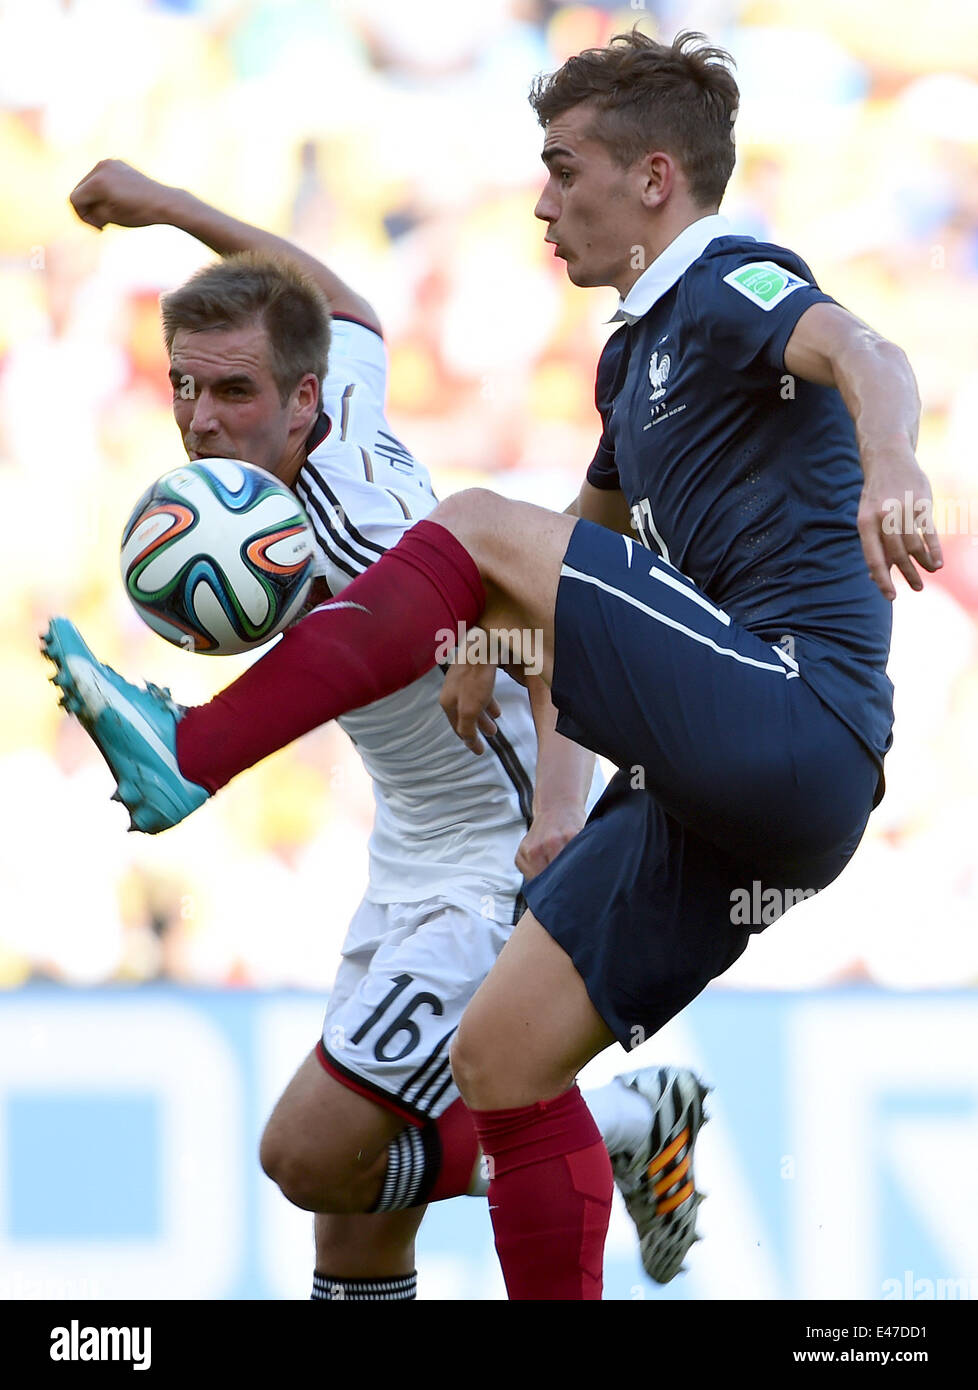 Rio De Janeiro, Brazil. 4th July, 2014. France's Antoine Griezmann vies with Germany's Philipp Lahm during a quarter-finals match between France and Germany of 2014 FIFA World Cup at the Estadio do Maracana Stadium in Rio de Janeiro, Brazil, on July 4, 2014. Credit:  Wang Yuguo/Xinhua/Alamy Live News Stock Photo